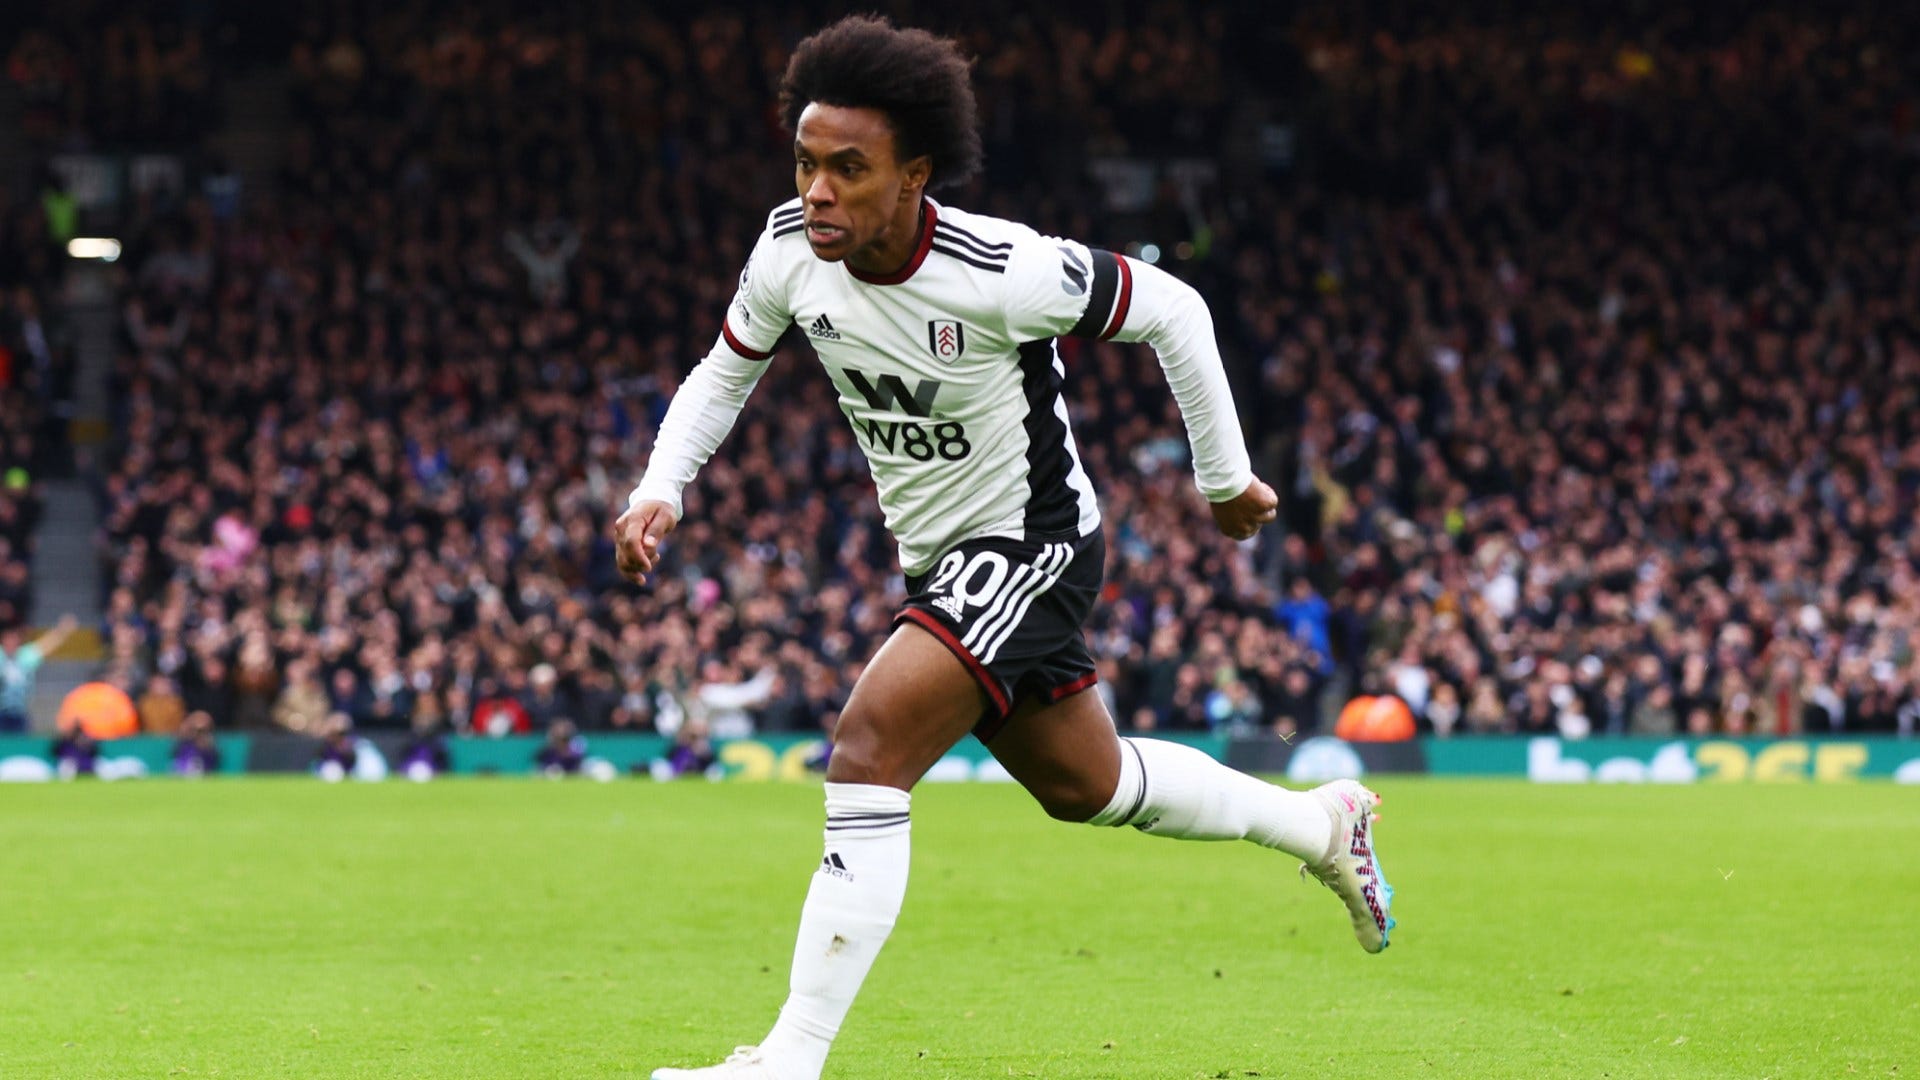 Fulham vs Crystal Palace Live stream, TV channel, kick-off time and where to watch Goal US